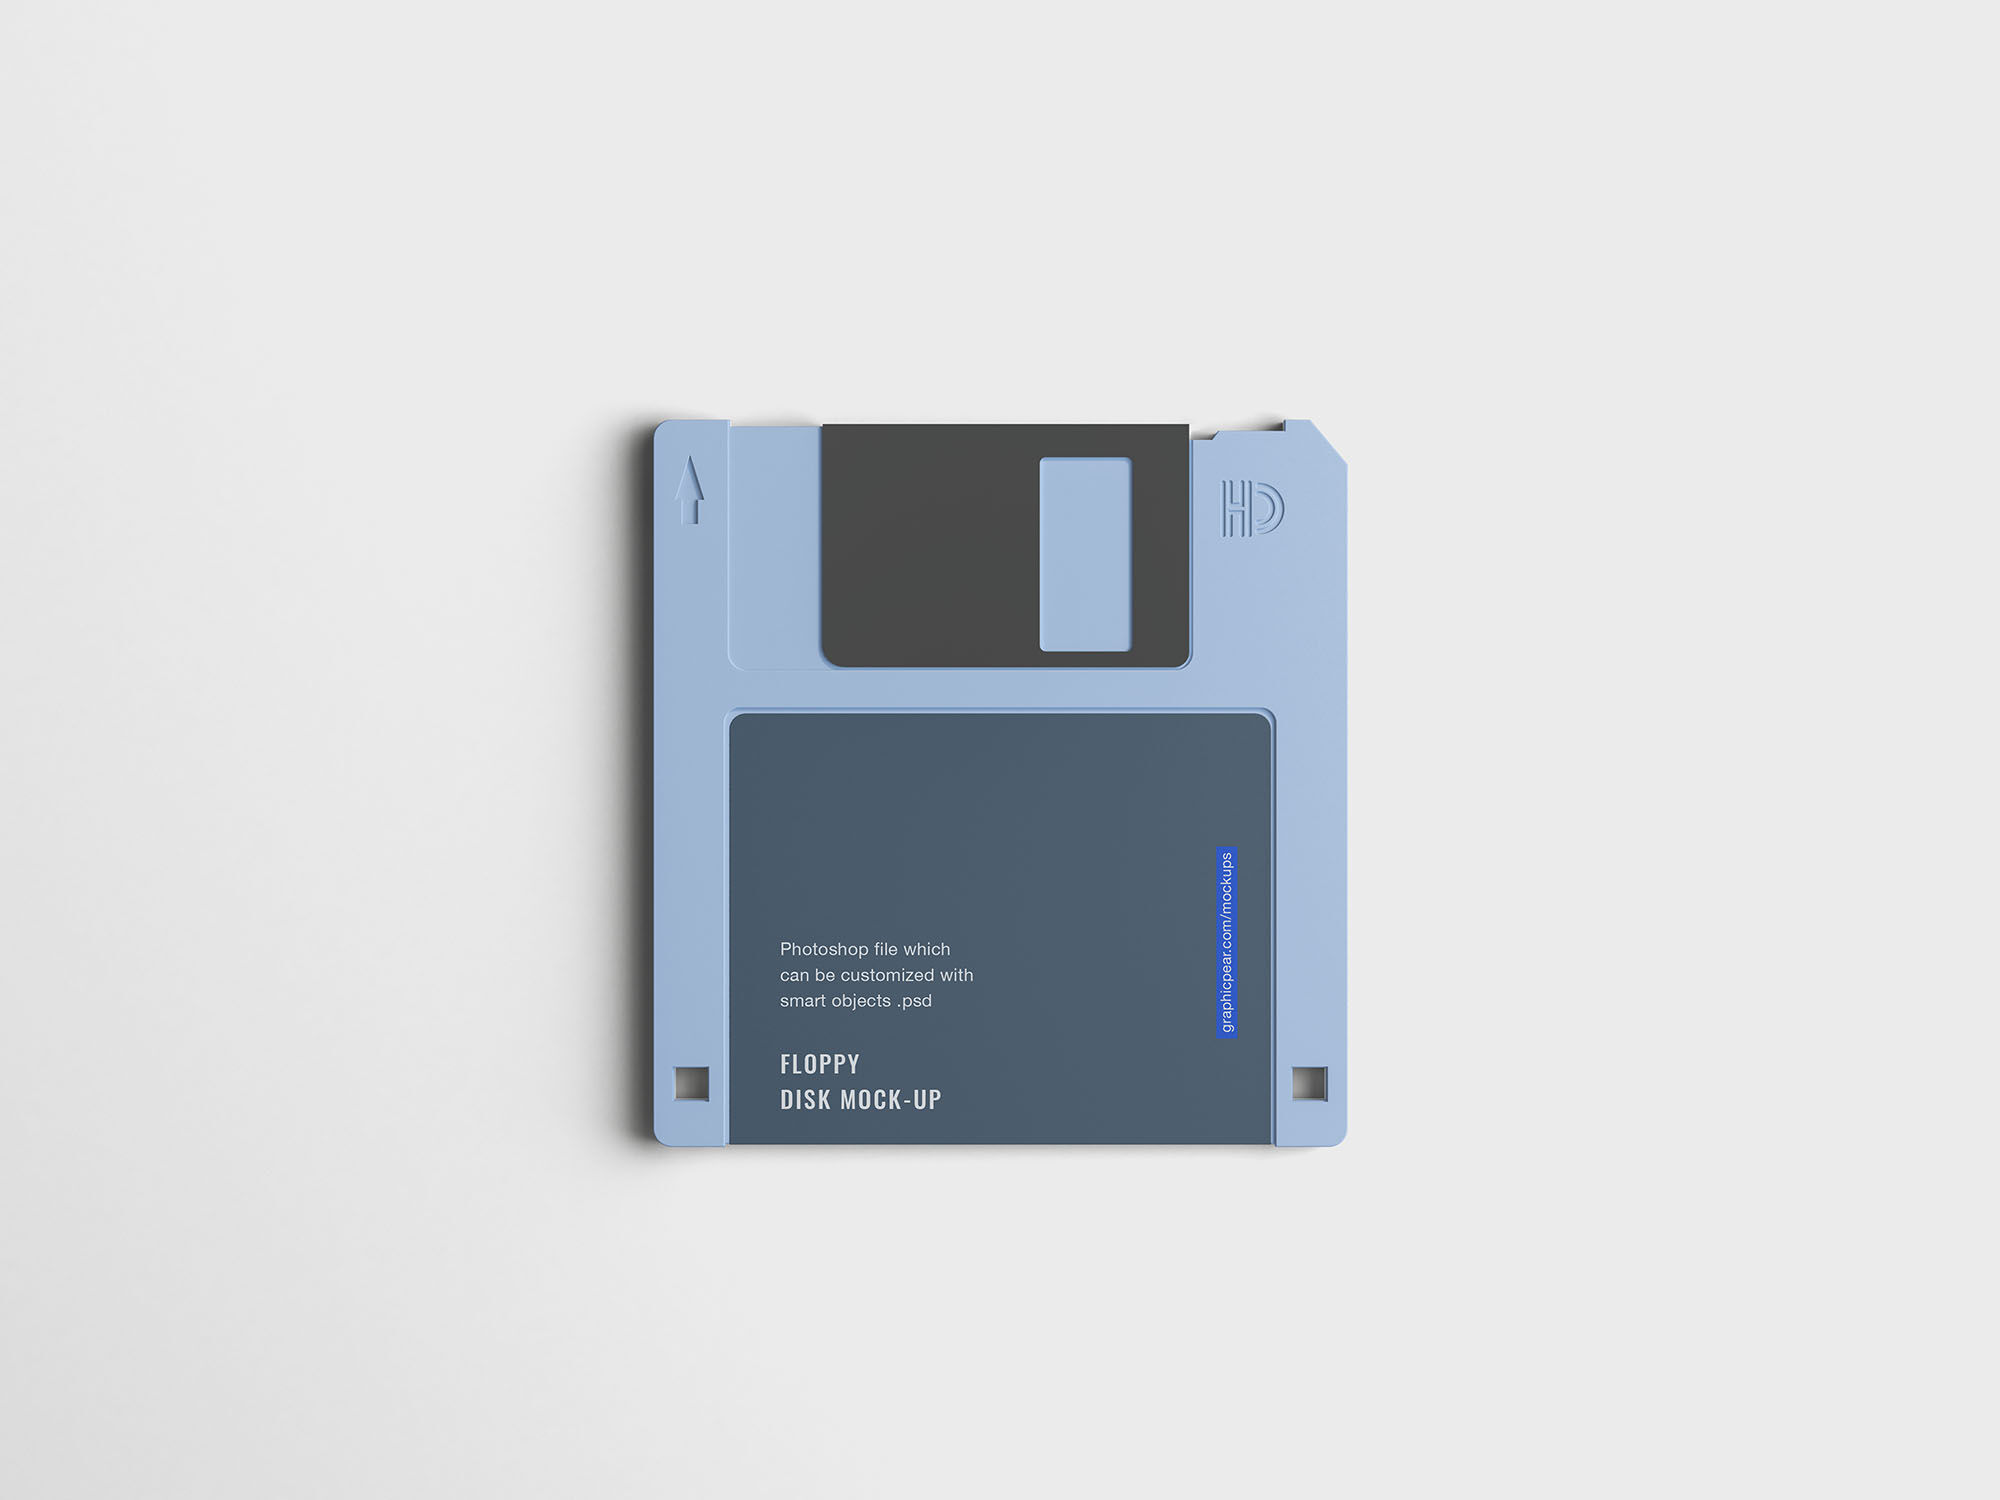 Top-View Classic Floppy Disk Mockup